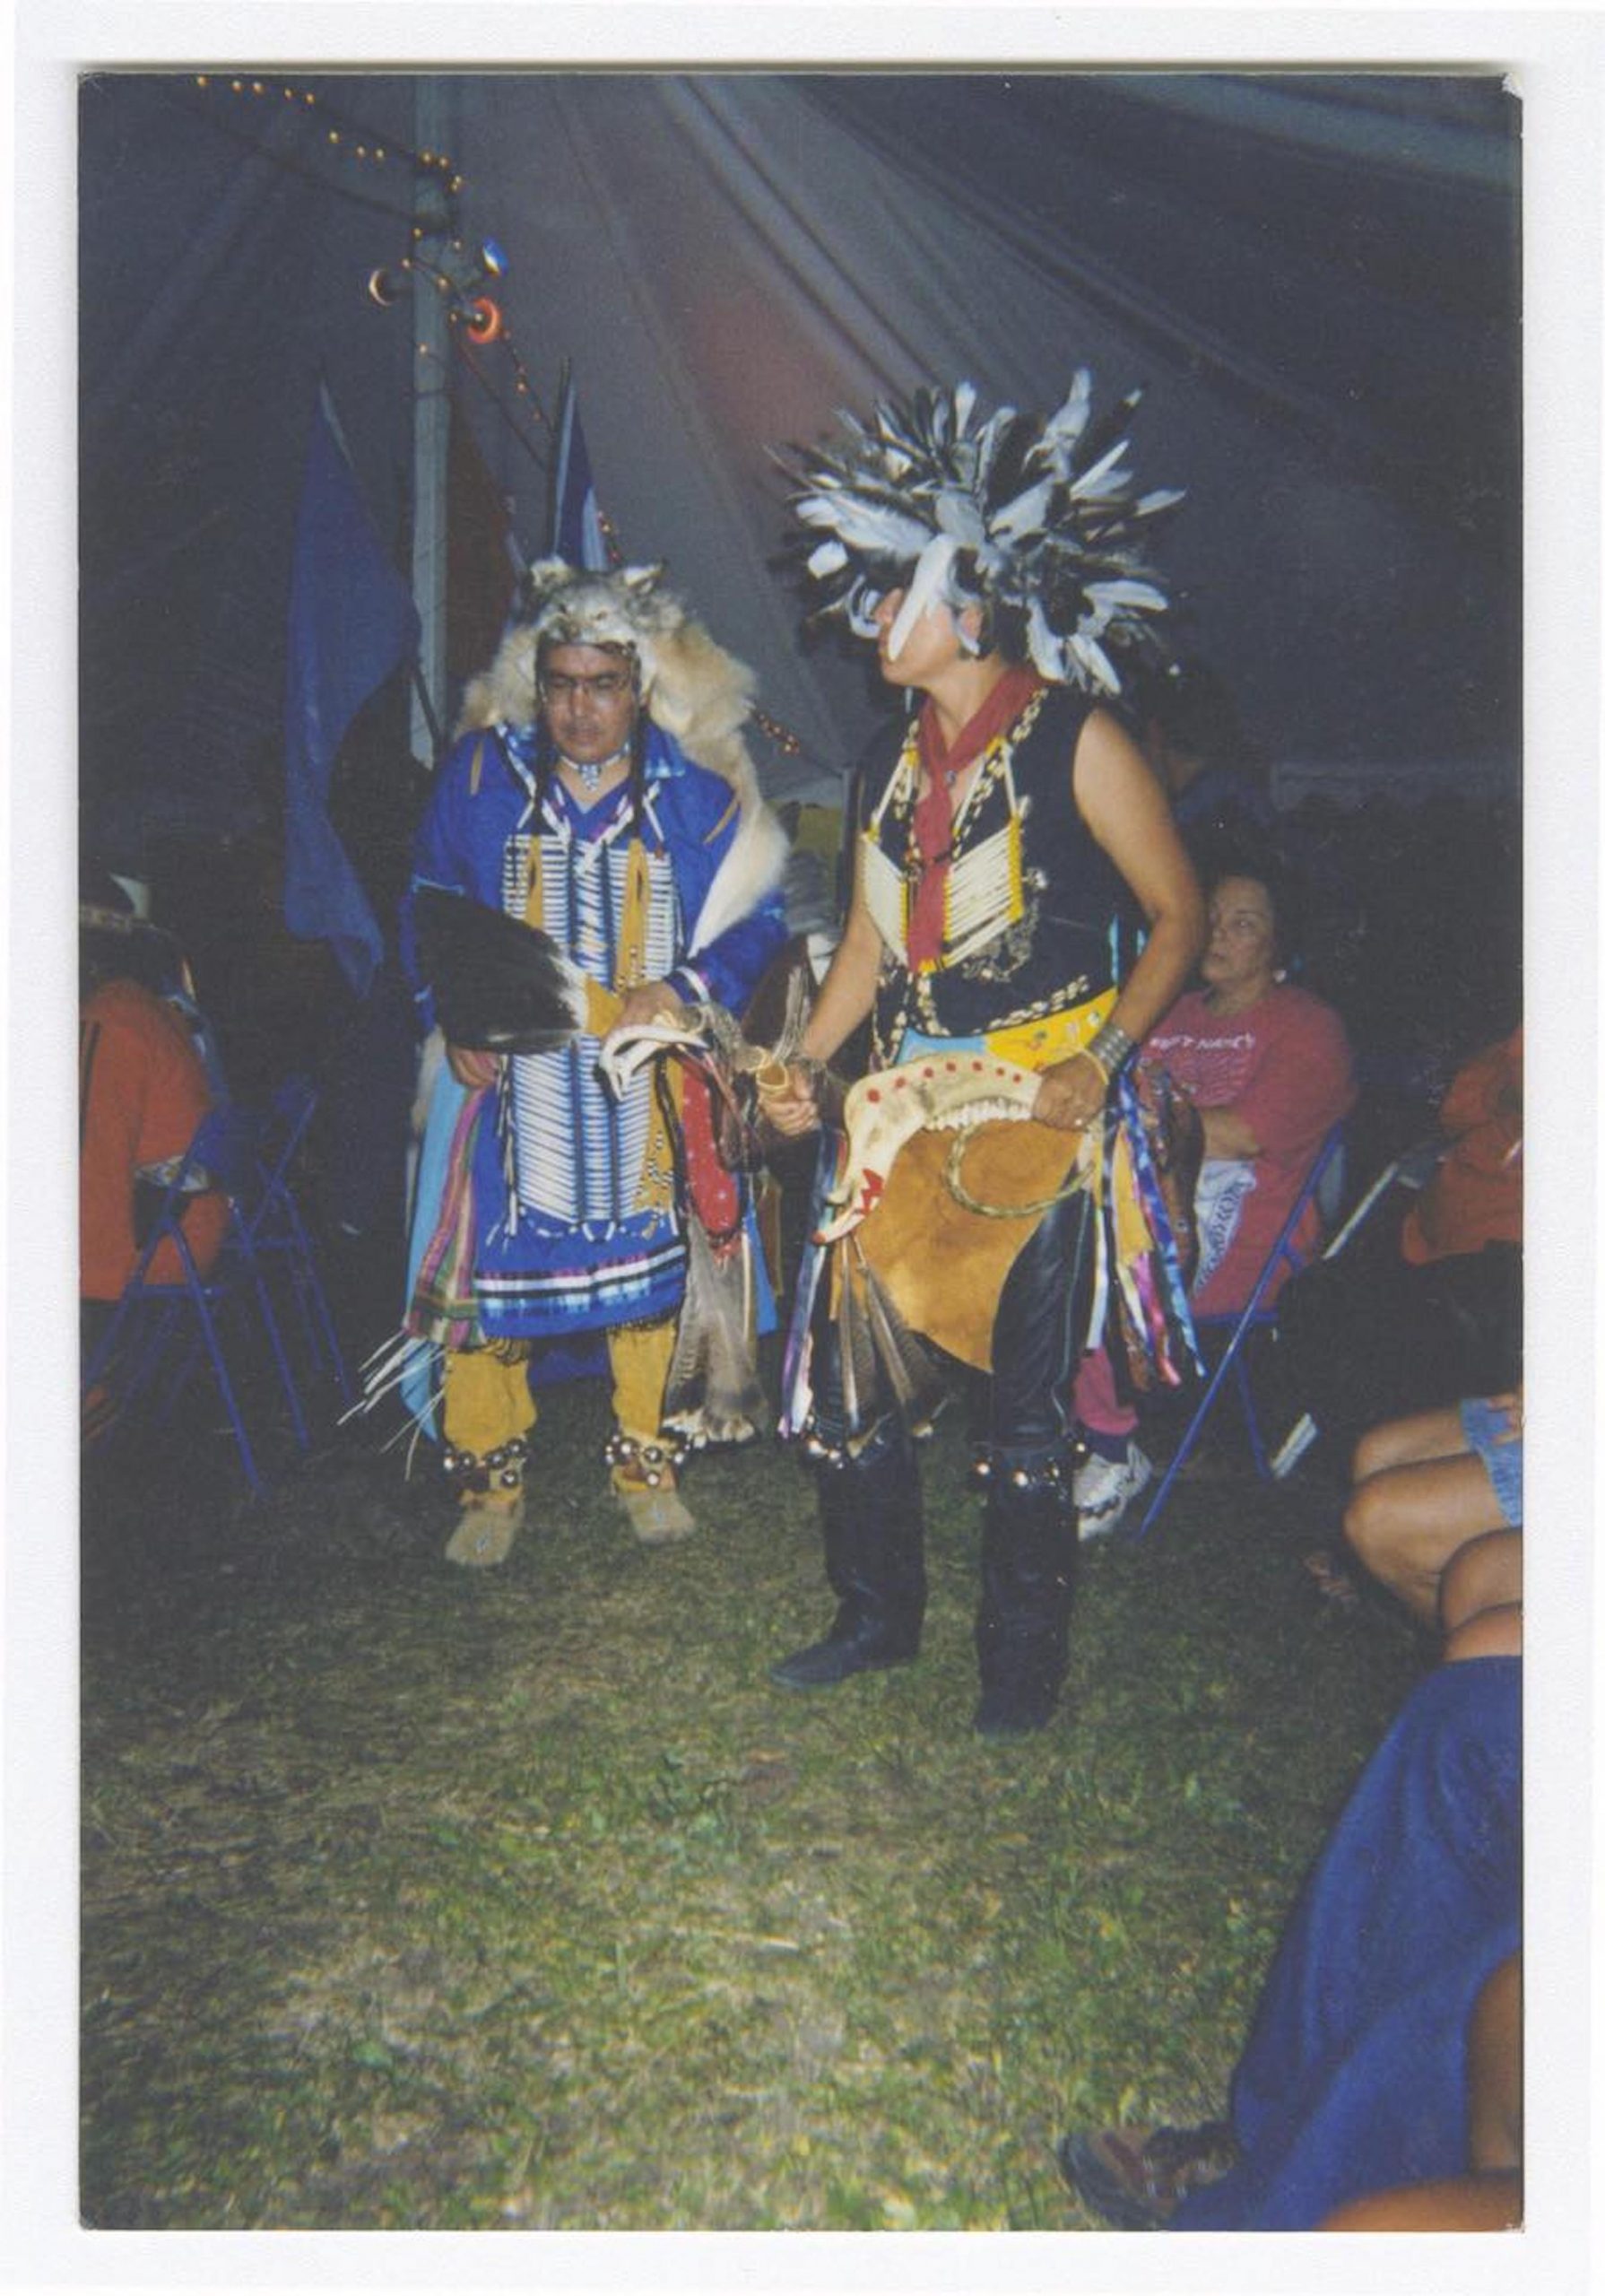 Albert McLeod attending the second National Aboriginal AIDS Conference in Vancouver and participating in ceremony.